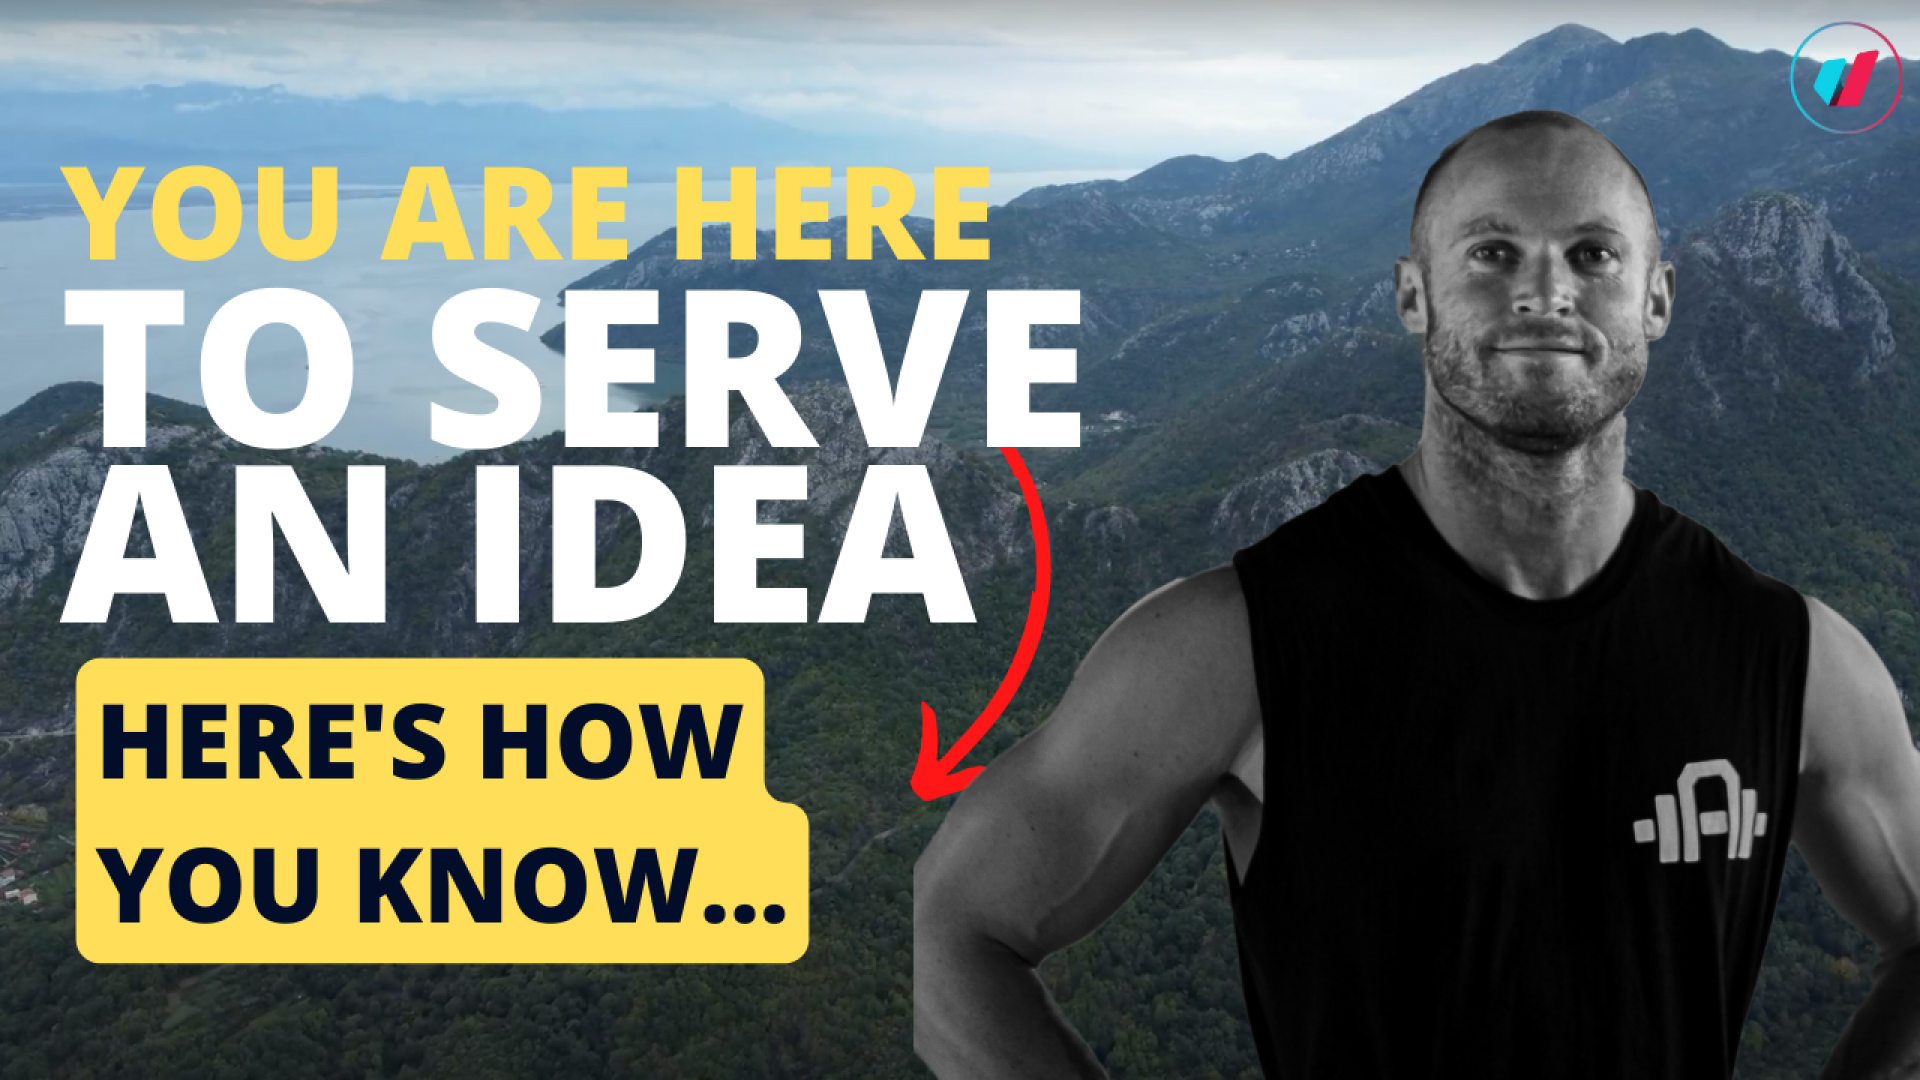 You are here to serve an idea